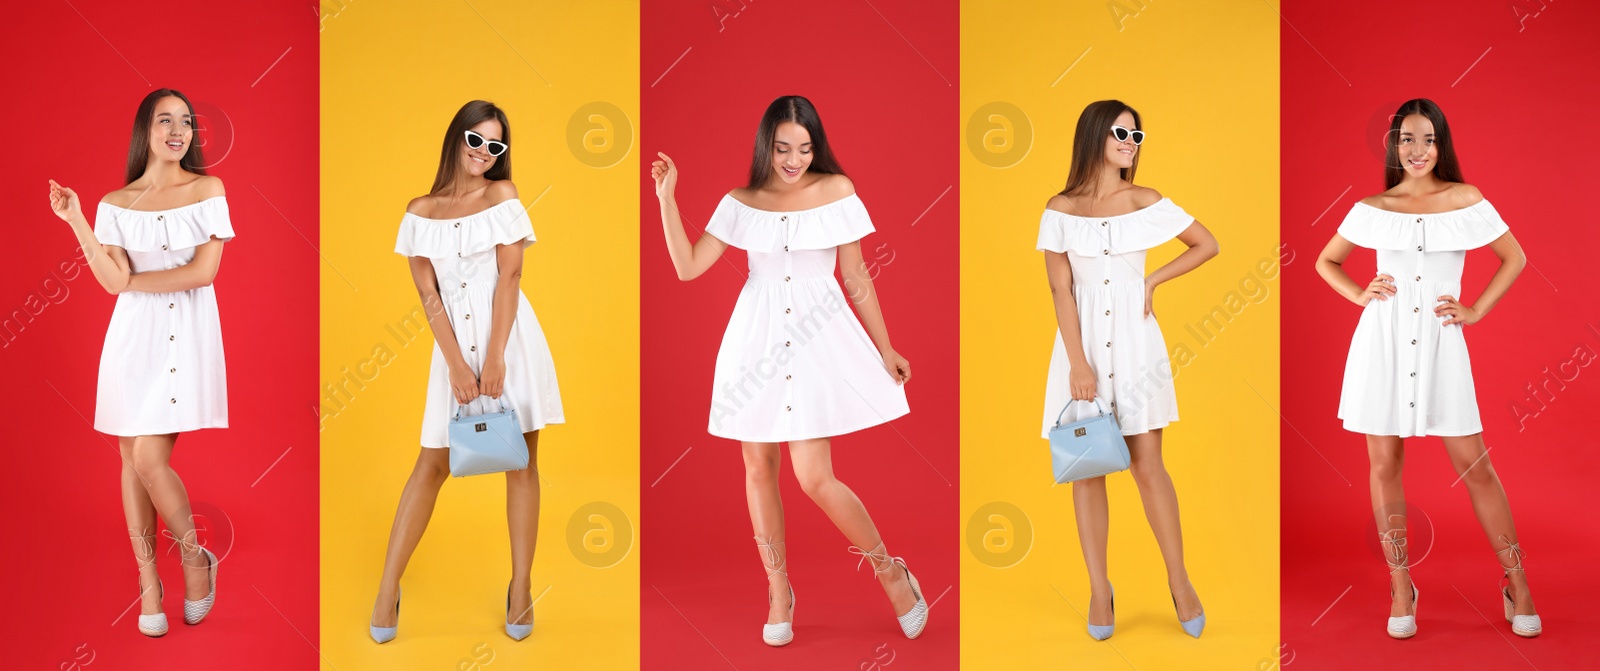 Image of Collage with photos of different young women wearing same dress on bright backgrounds